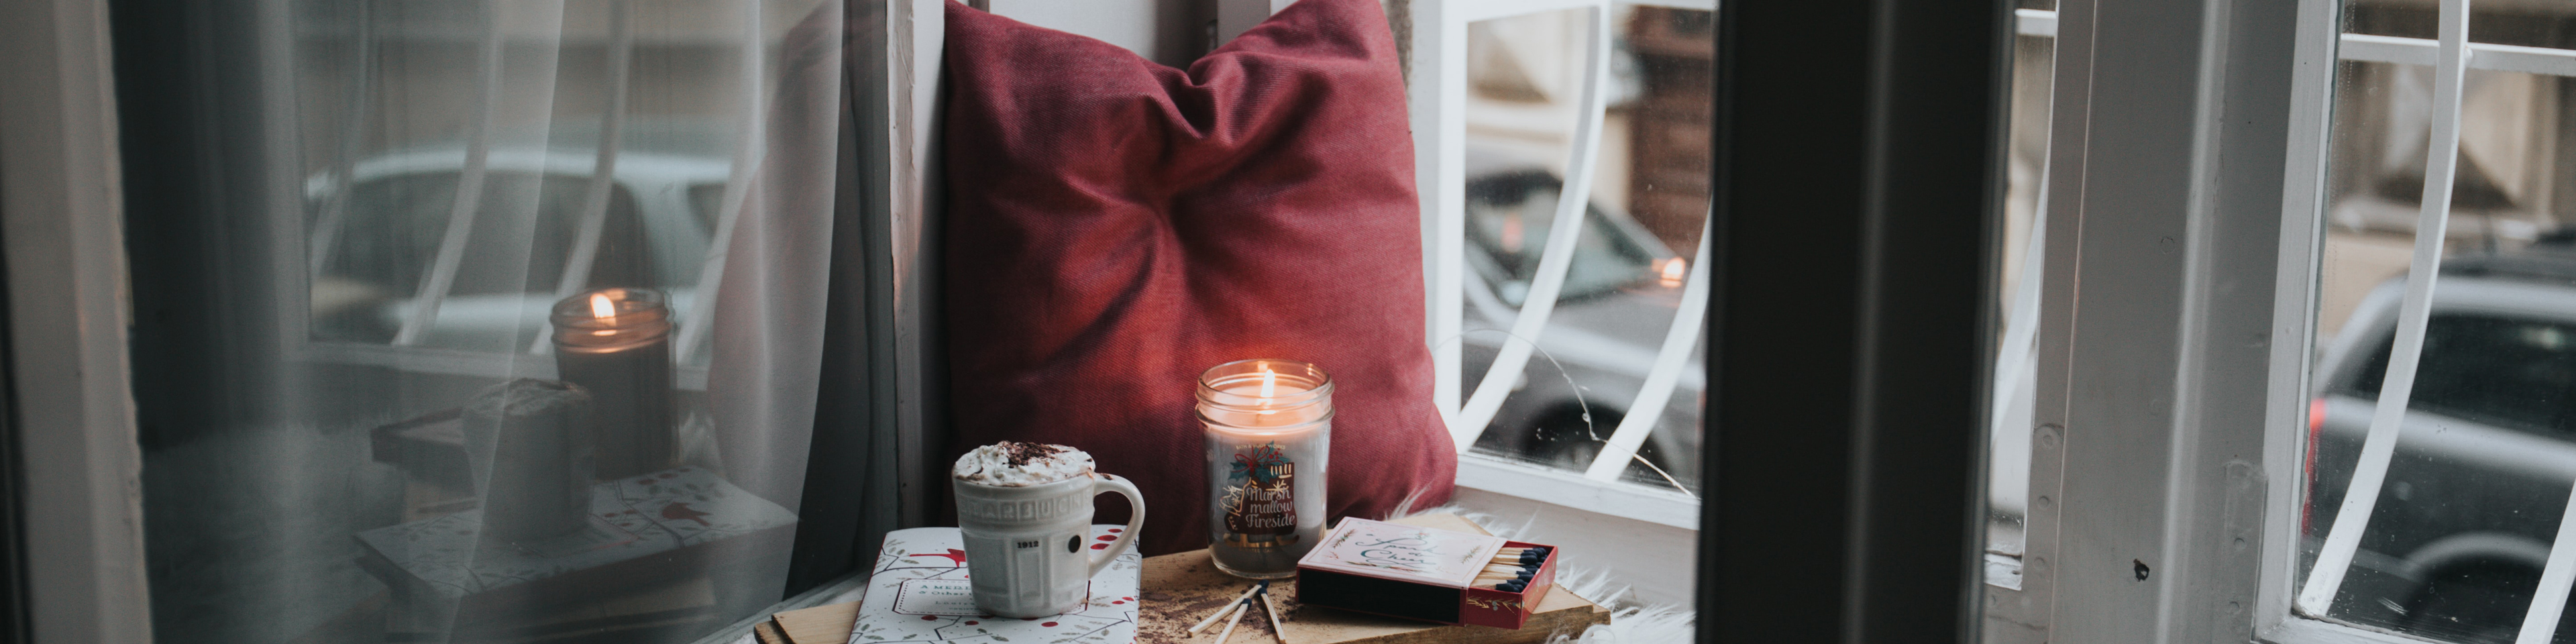 Window seat with blanket, pillow, book, drink, and candle